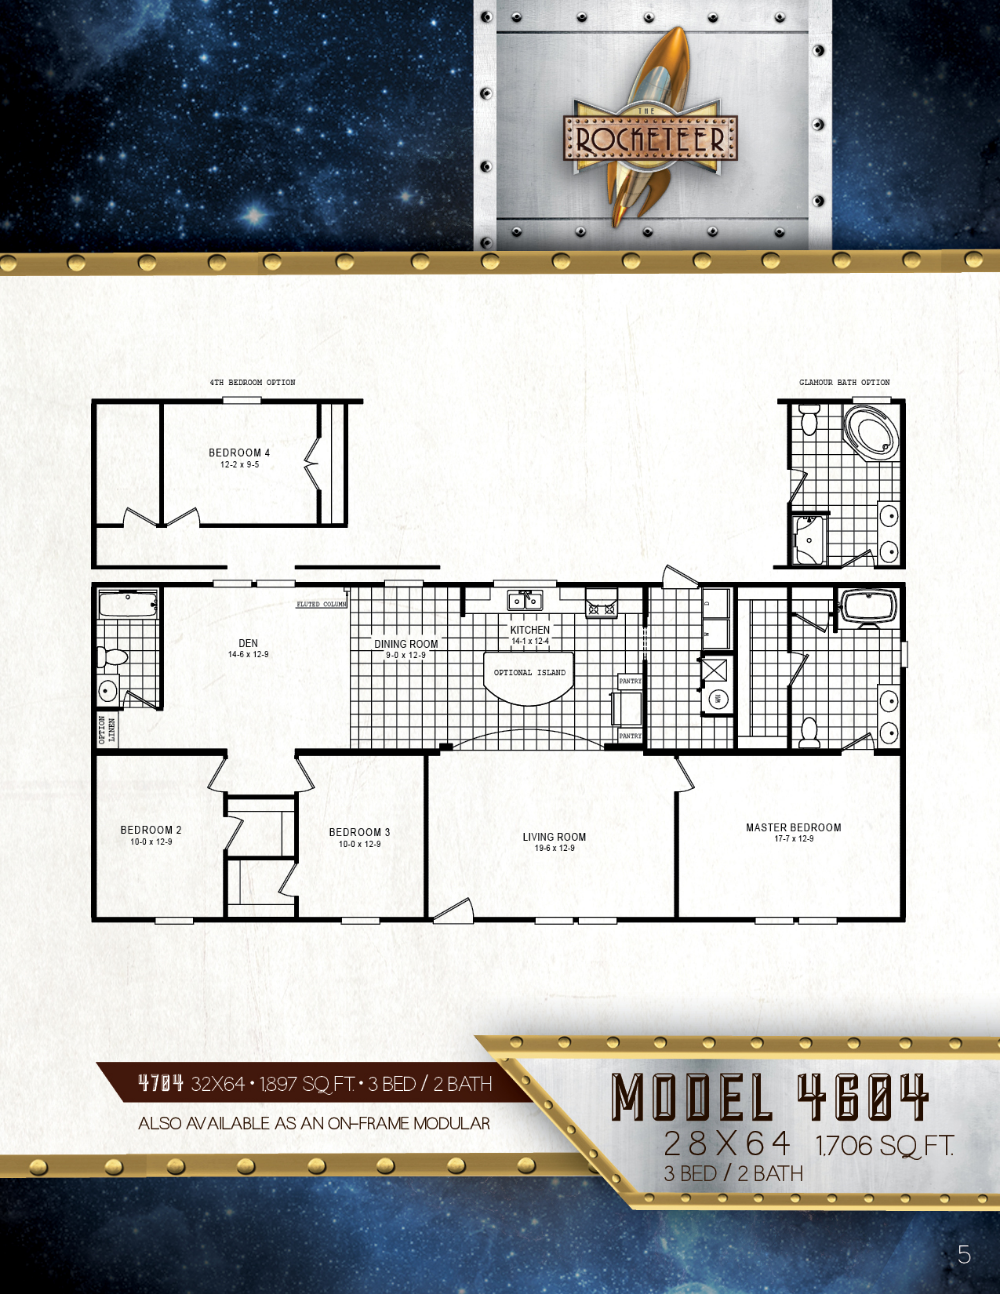 Rocketeer Schult Rockwell Small house floor plans